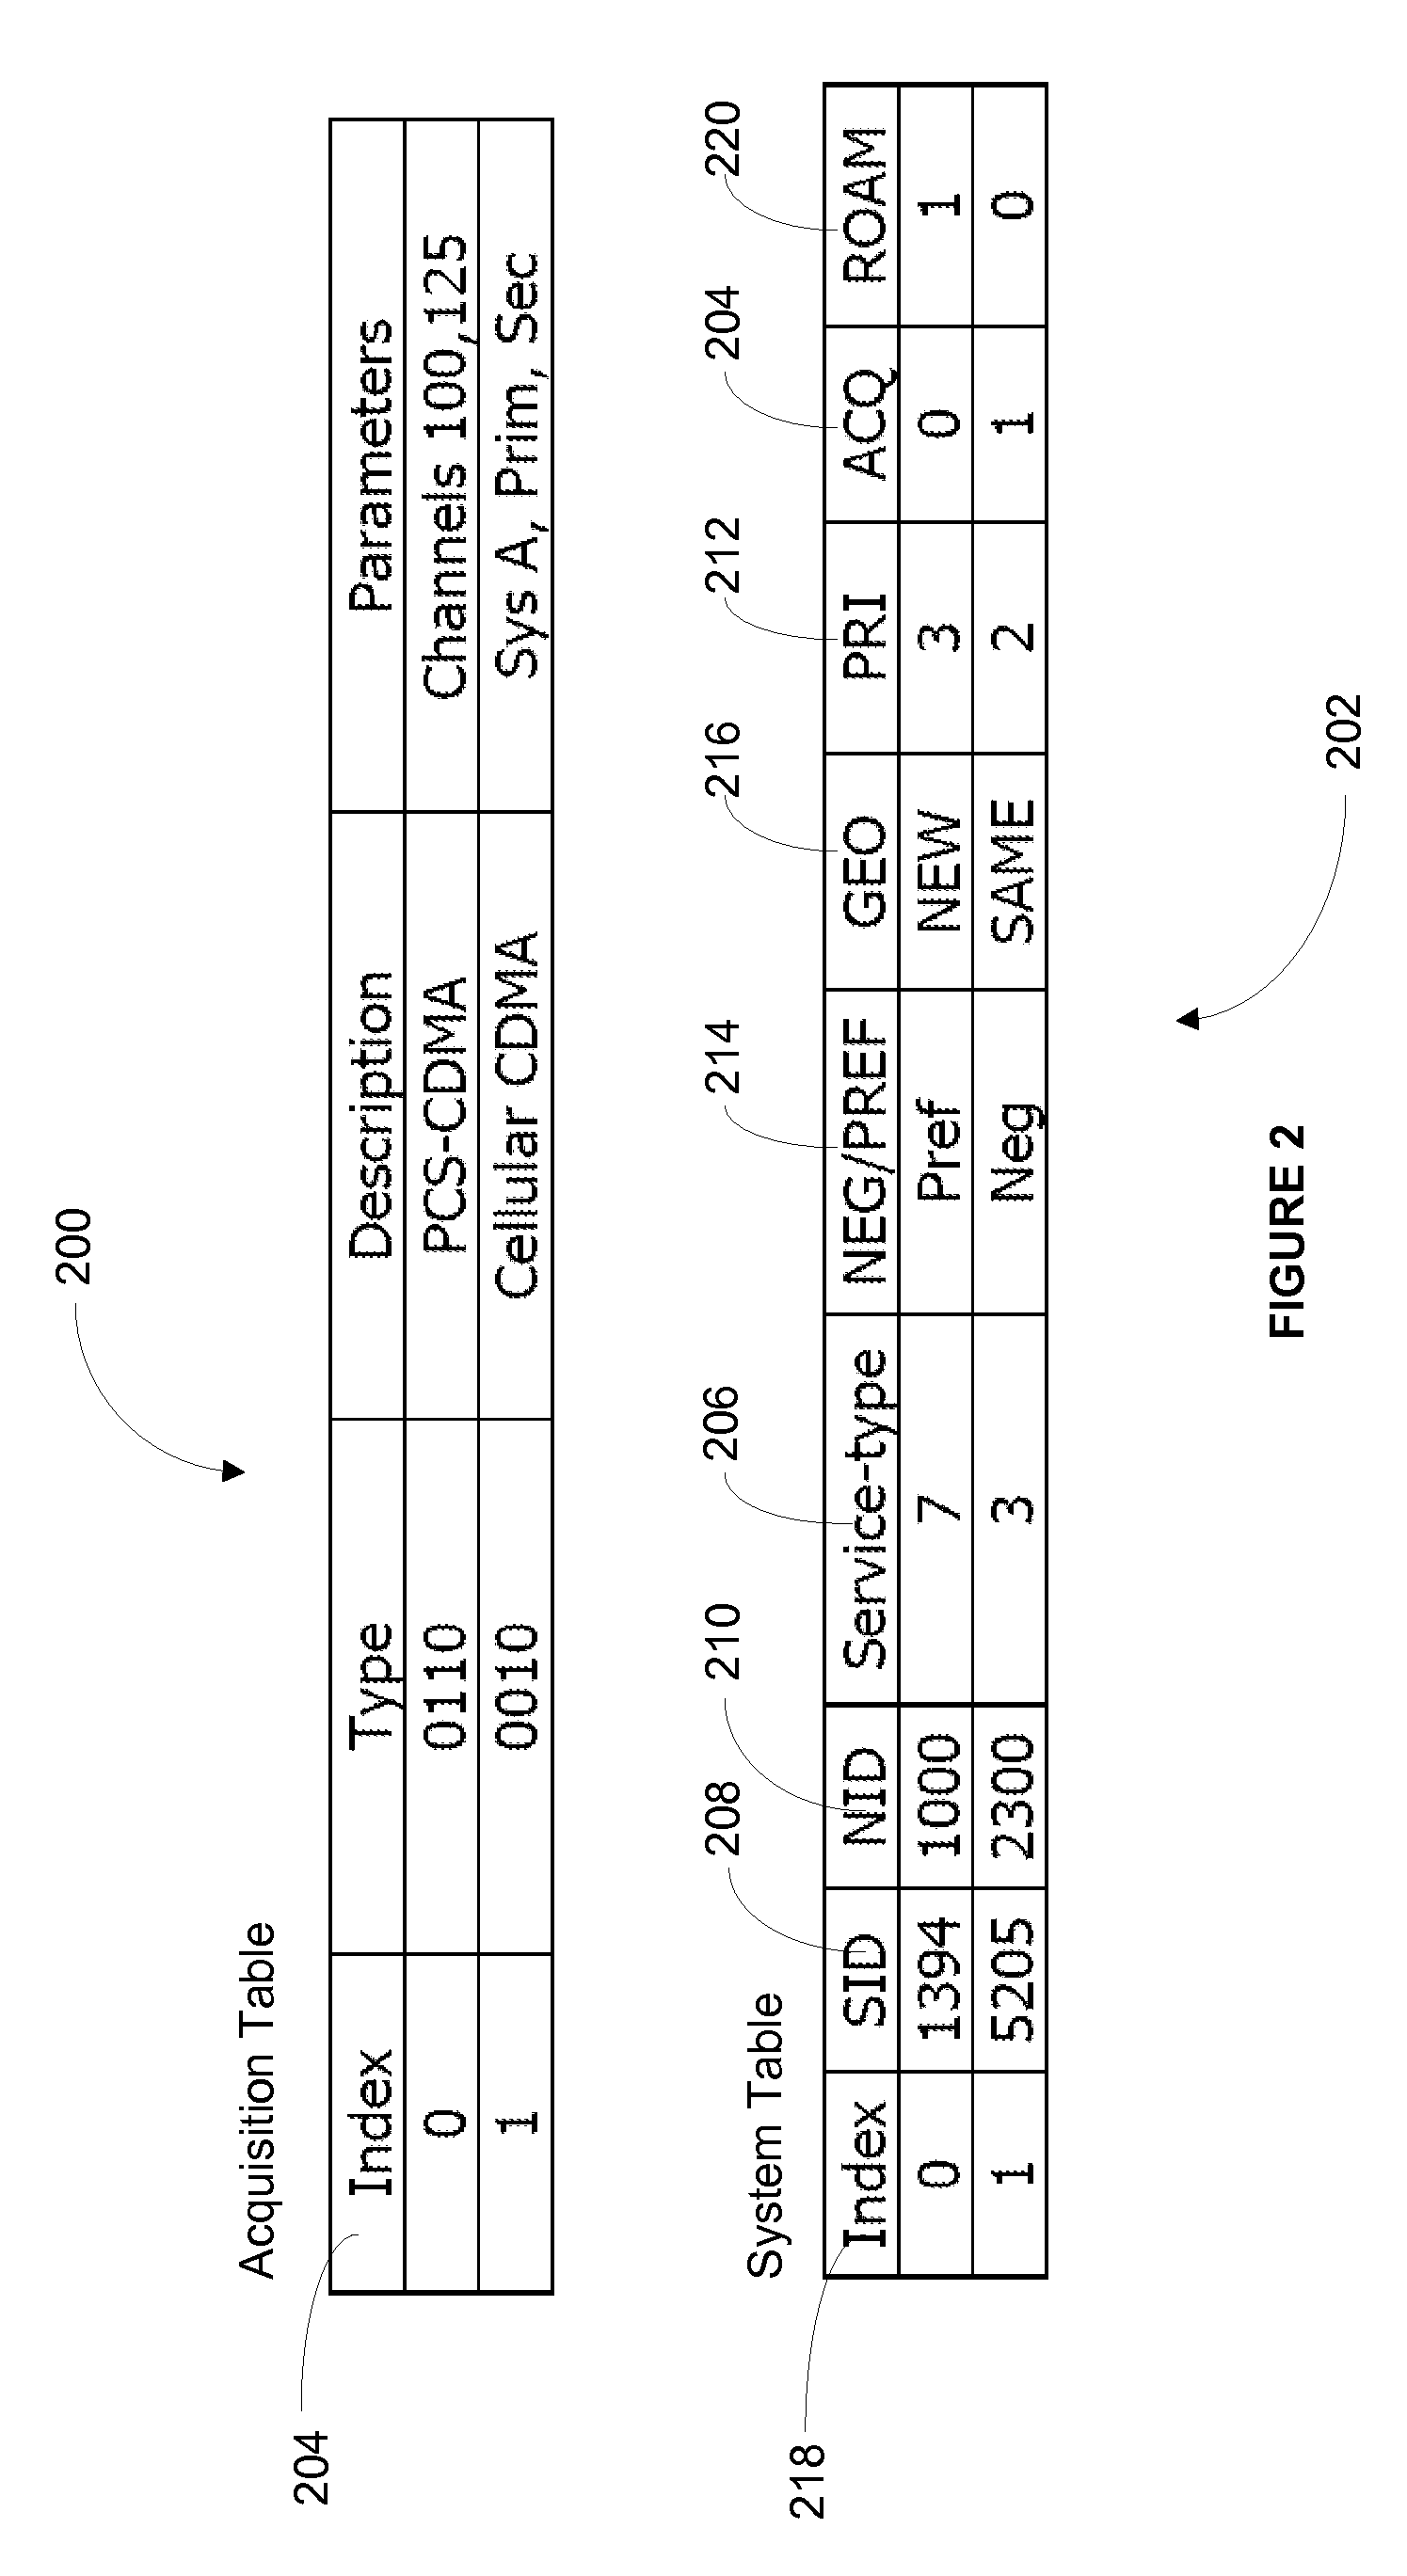 System selection based on service-specific preferred roaming list in a wireless network